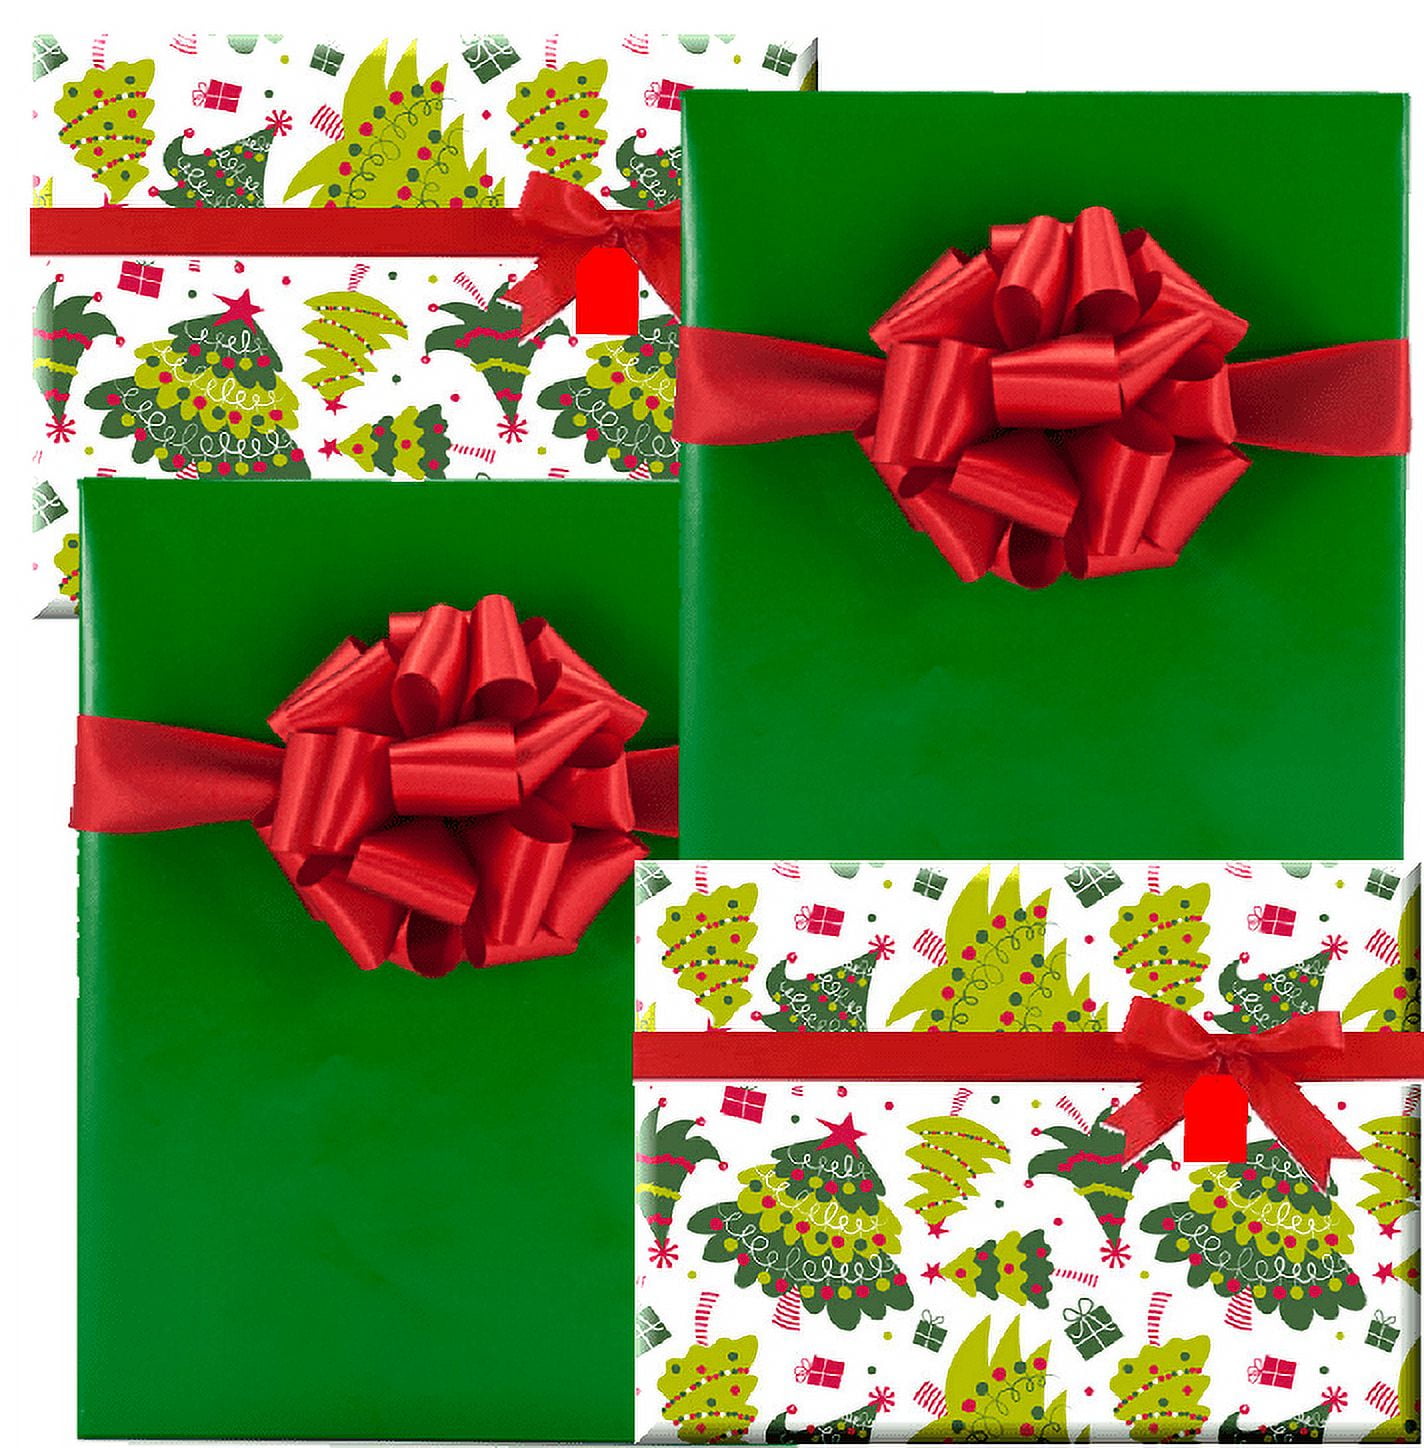 Toptime Christmas Wrapping Paper, 6 Sheets Green Gift Wrapping Paper Set w/Gift Tags, Gift Ribbon and Stickers, Green Christmas Gift Wrap W